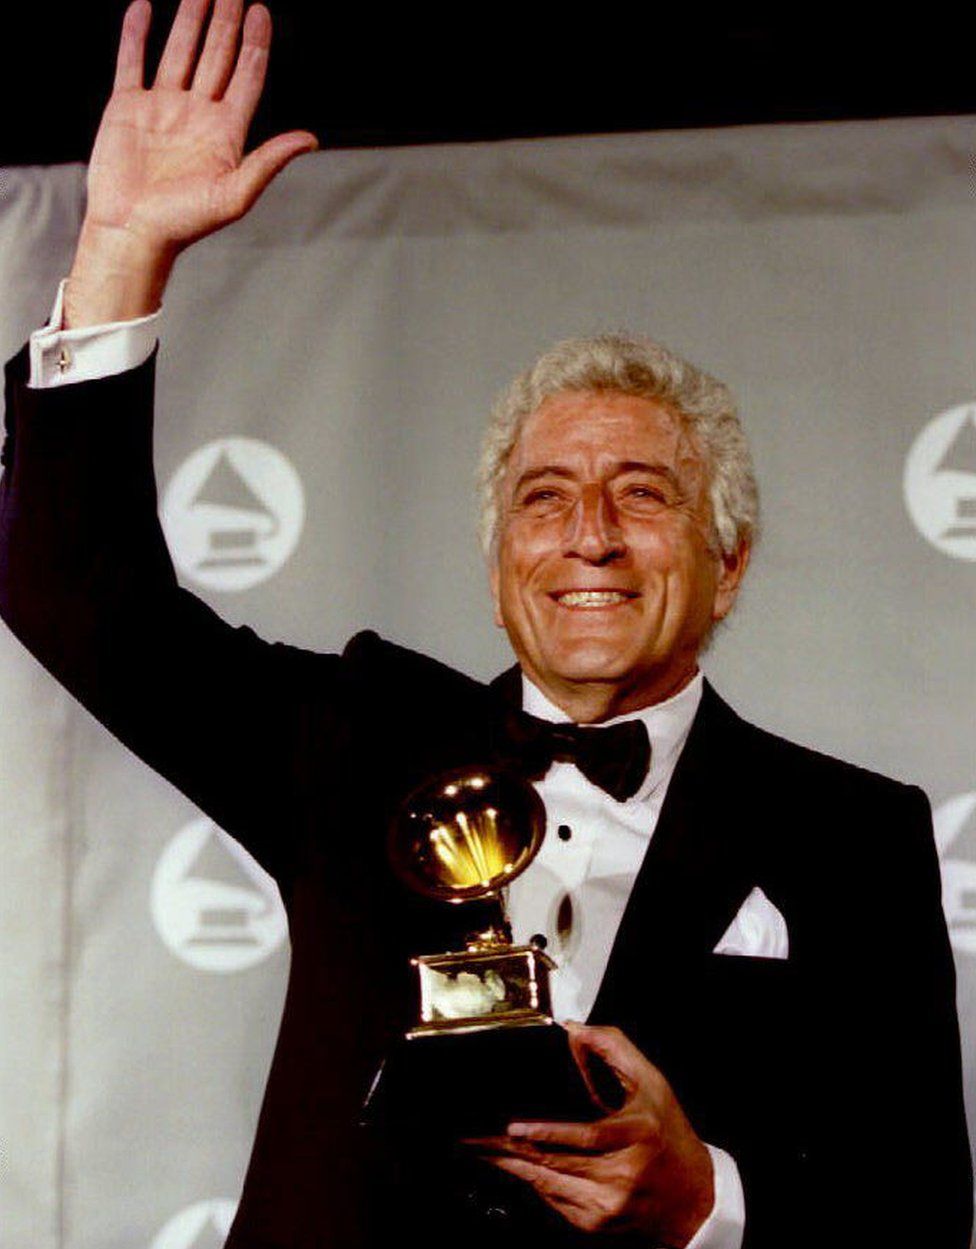 Tony Bennett obituary: The great interpreter of the American songbook ...